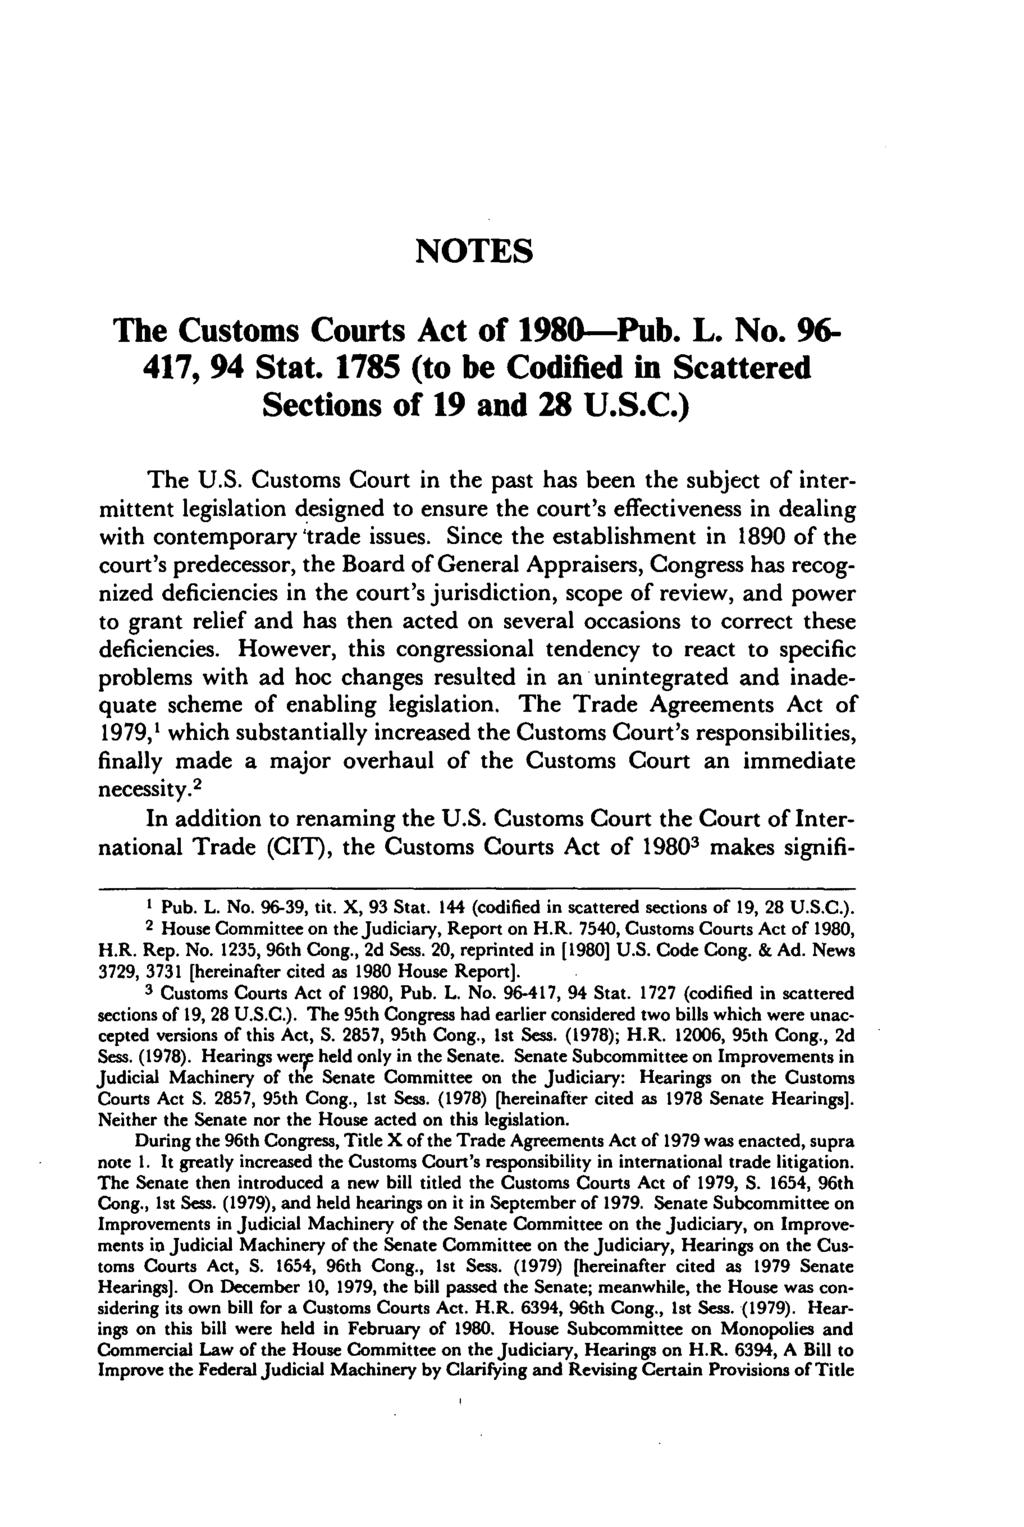 NOTES The Customs Courts Act of 1980-Pub. L. No. 96-417, 94 Stat. 1785 (to be Codified in Scattered Sections of 19 and 28 U.S.C.) The U.S. Customs Court in the past has been the subject of intermittent legislation designed to ensure the court's effectiveness in dealing with contemporary 'trade issues.